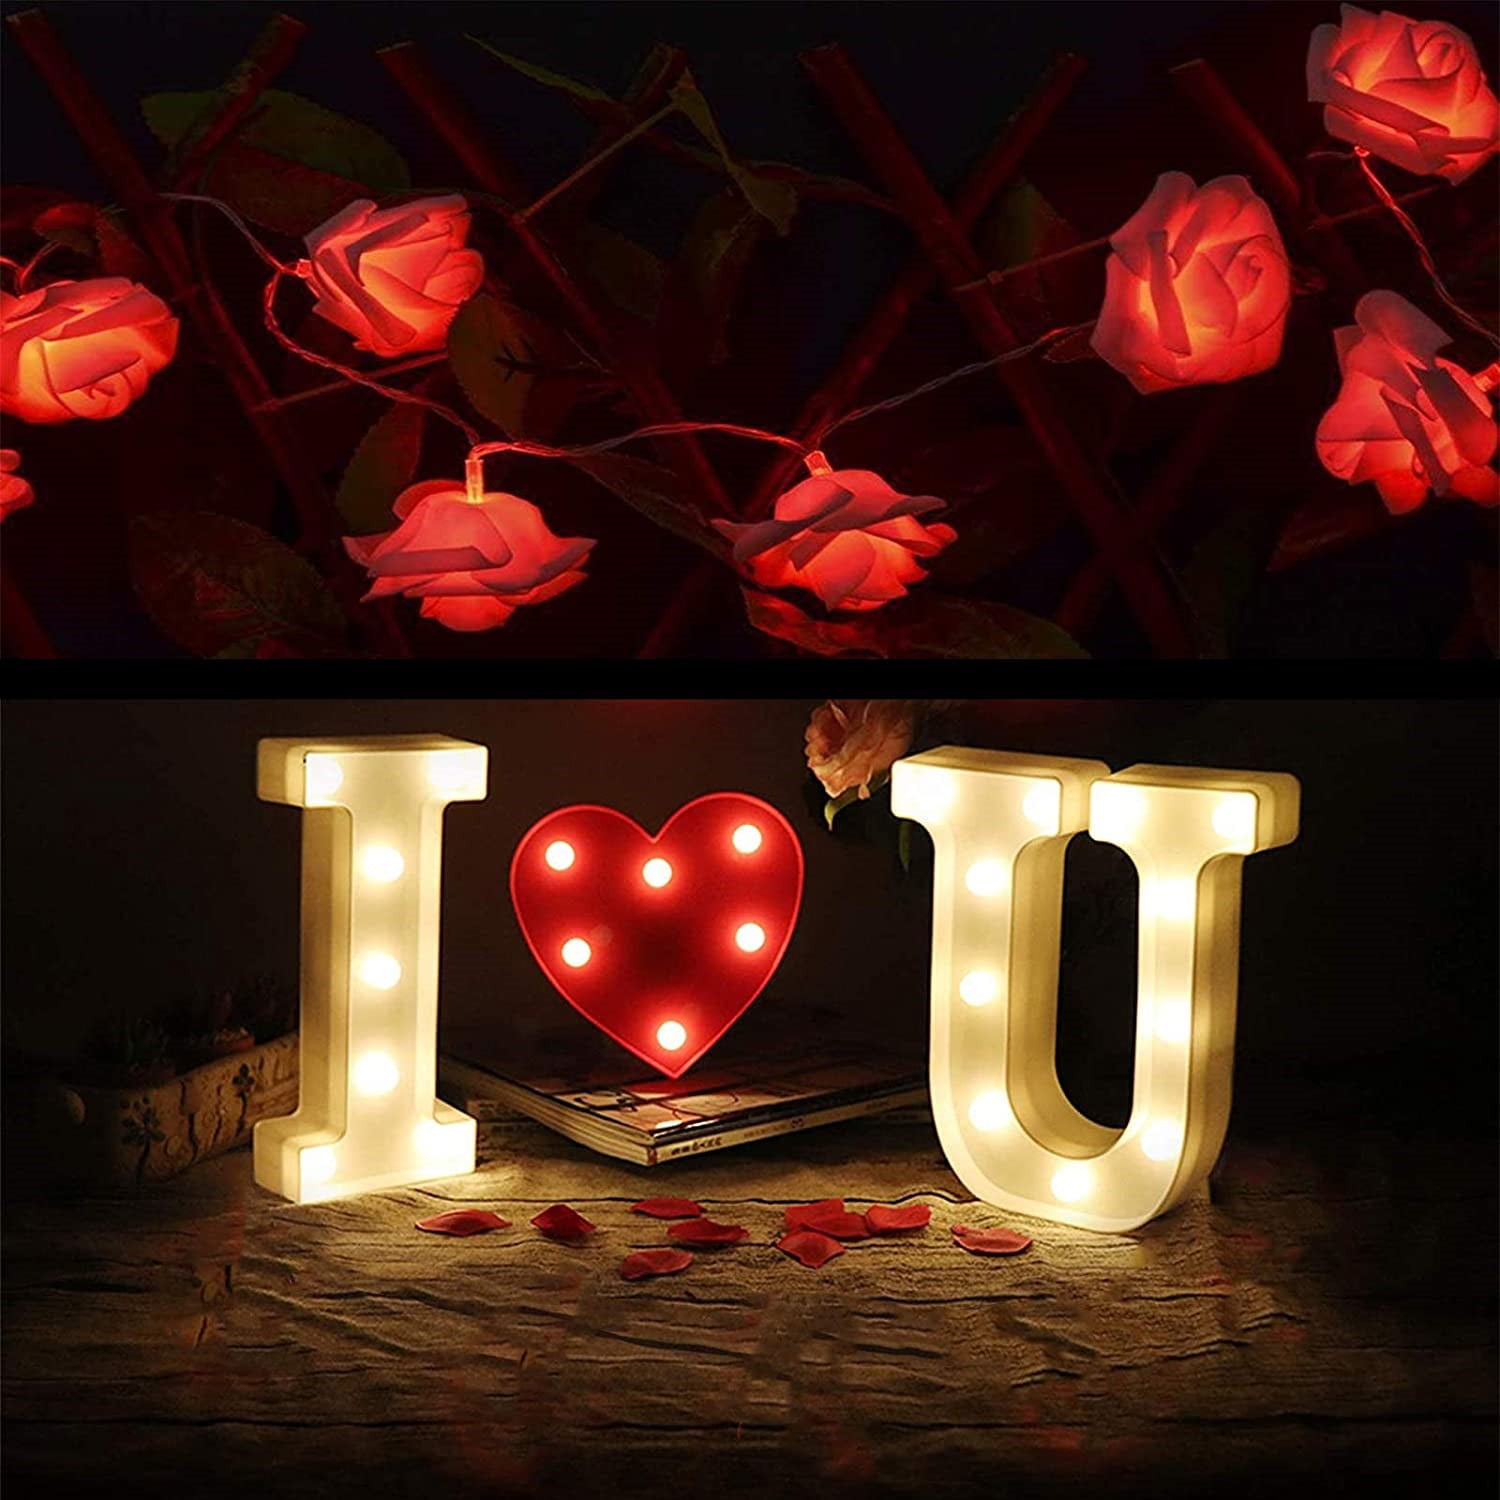 20LED Photo Clip Star Shape String Light Window Party Decor Valentine's Day Gift 